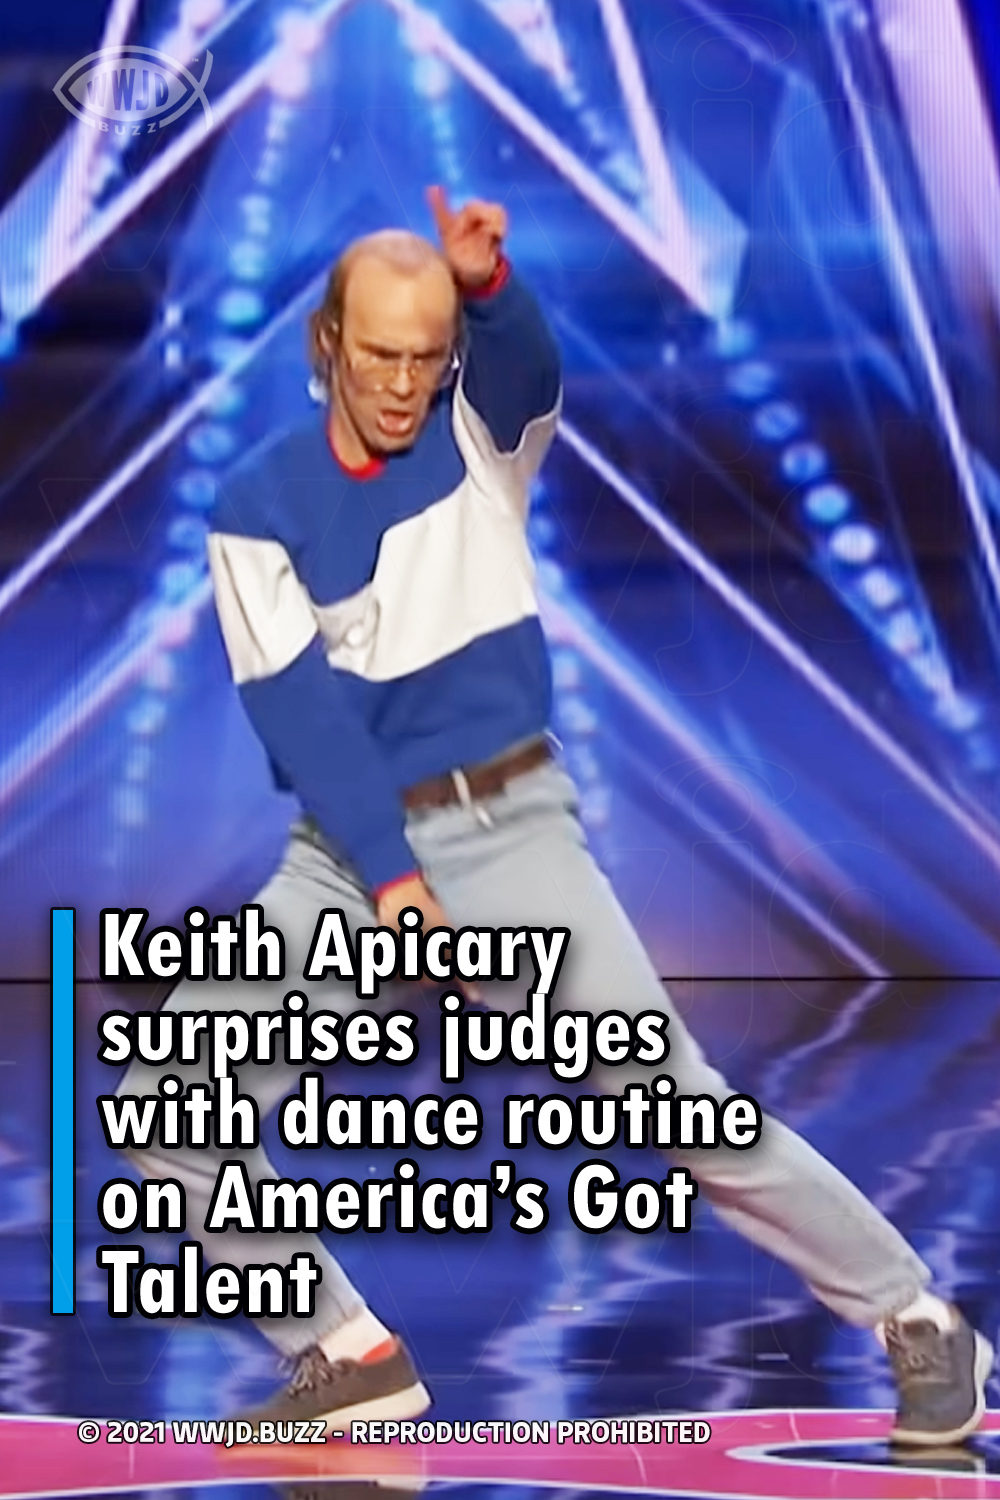 Keith Apicary surprises judges with dance routine on America’s Got Talent